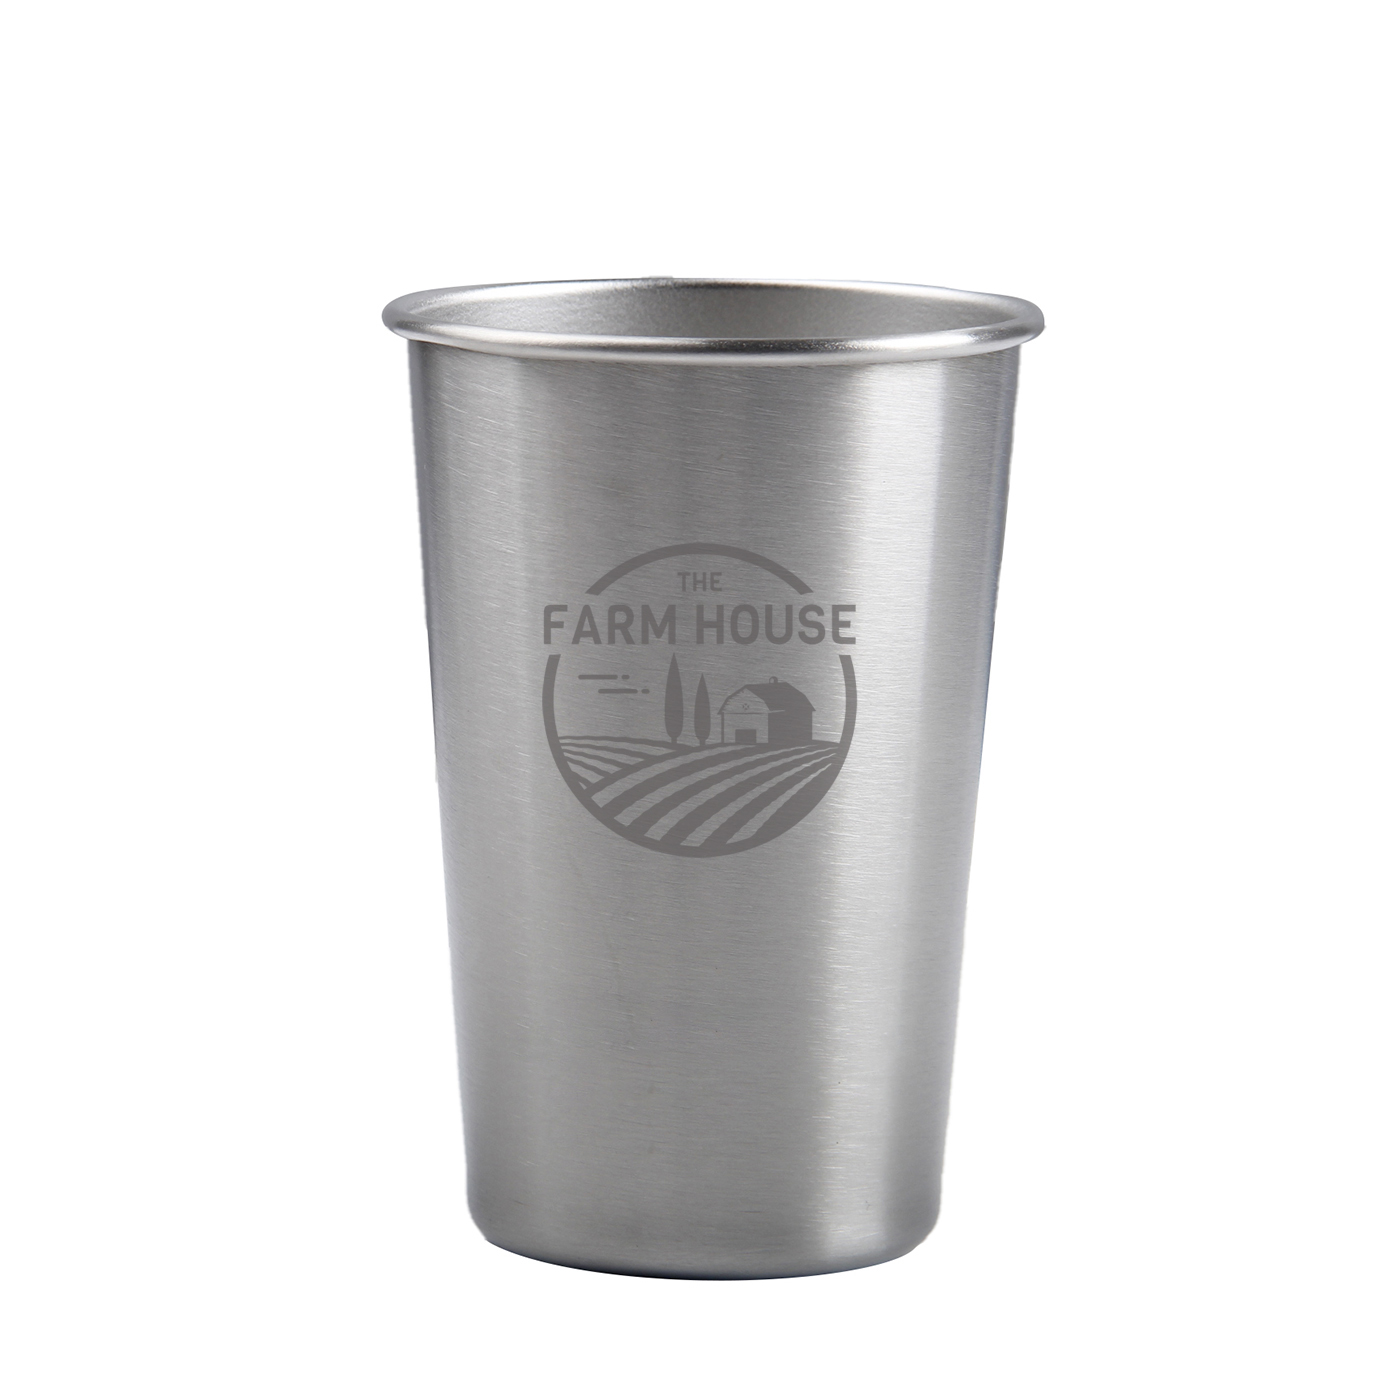 6 oz. Stainless Steel Pint Drinking Cup